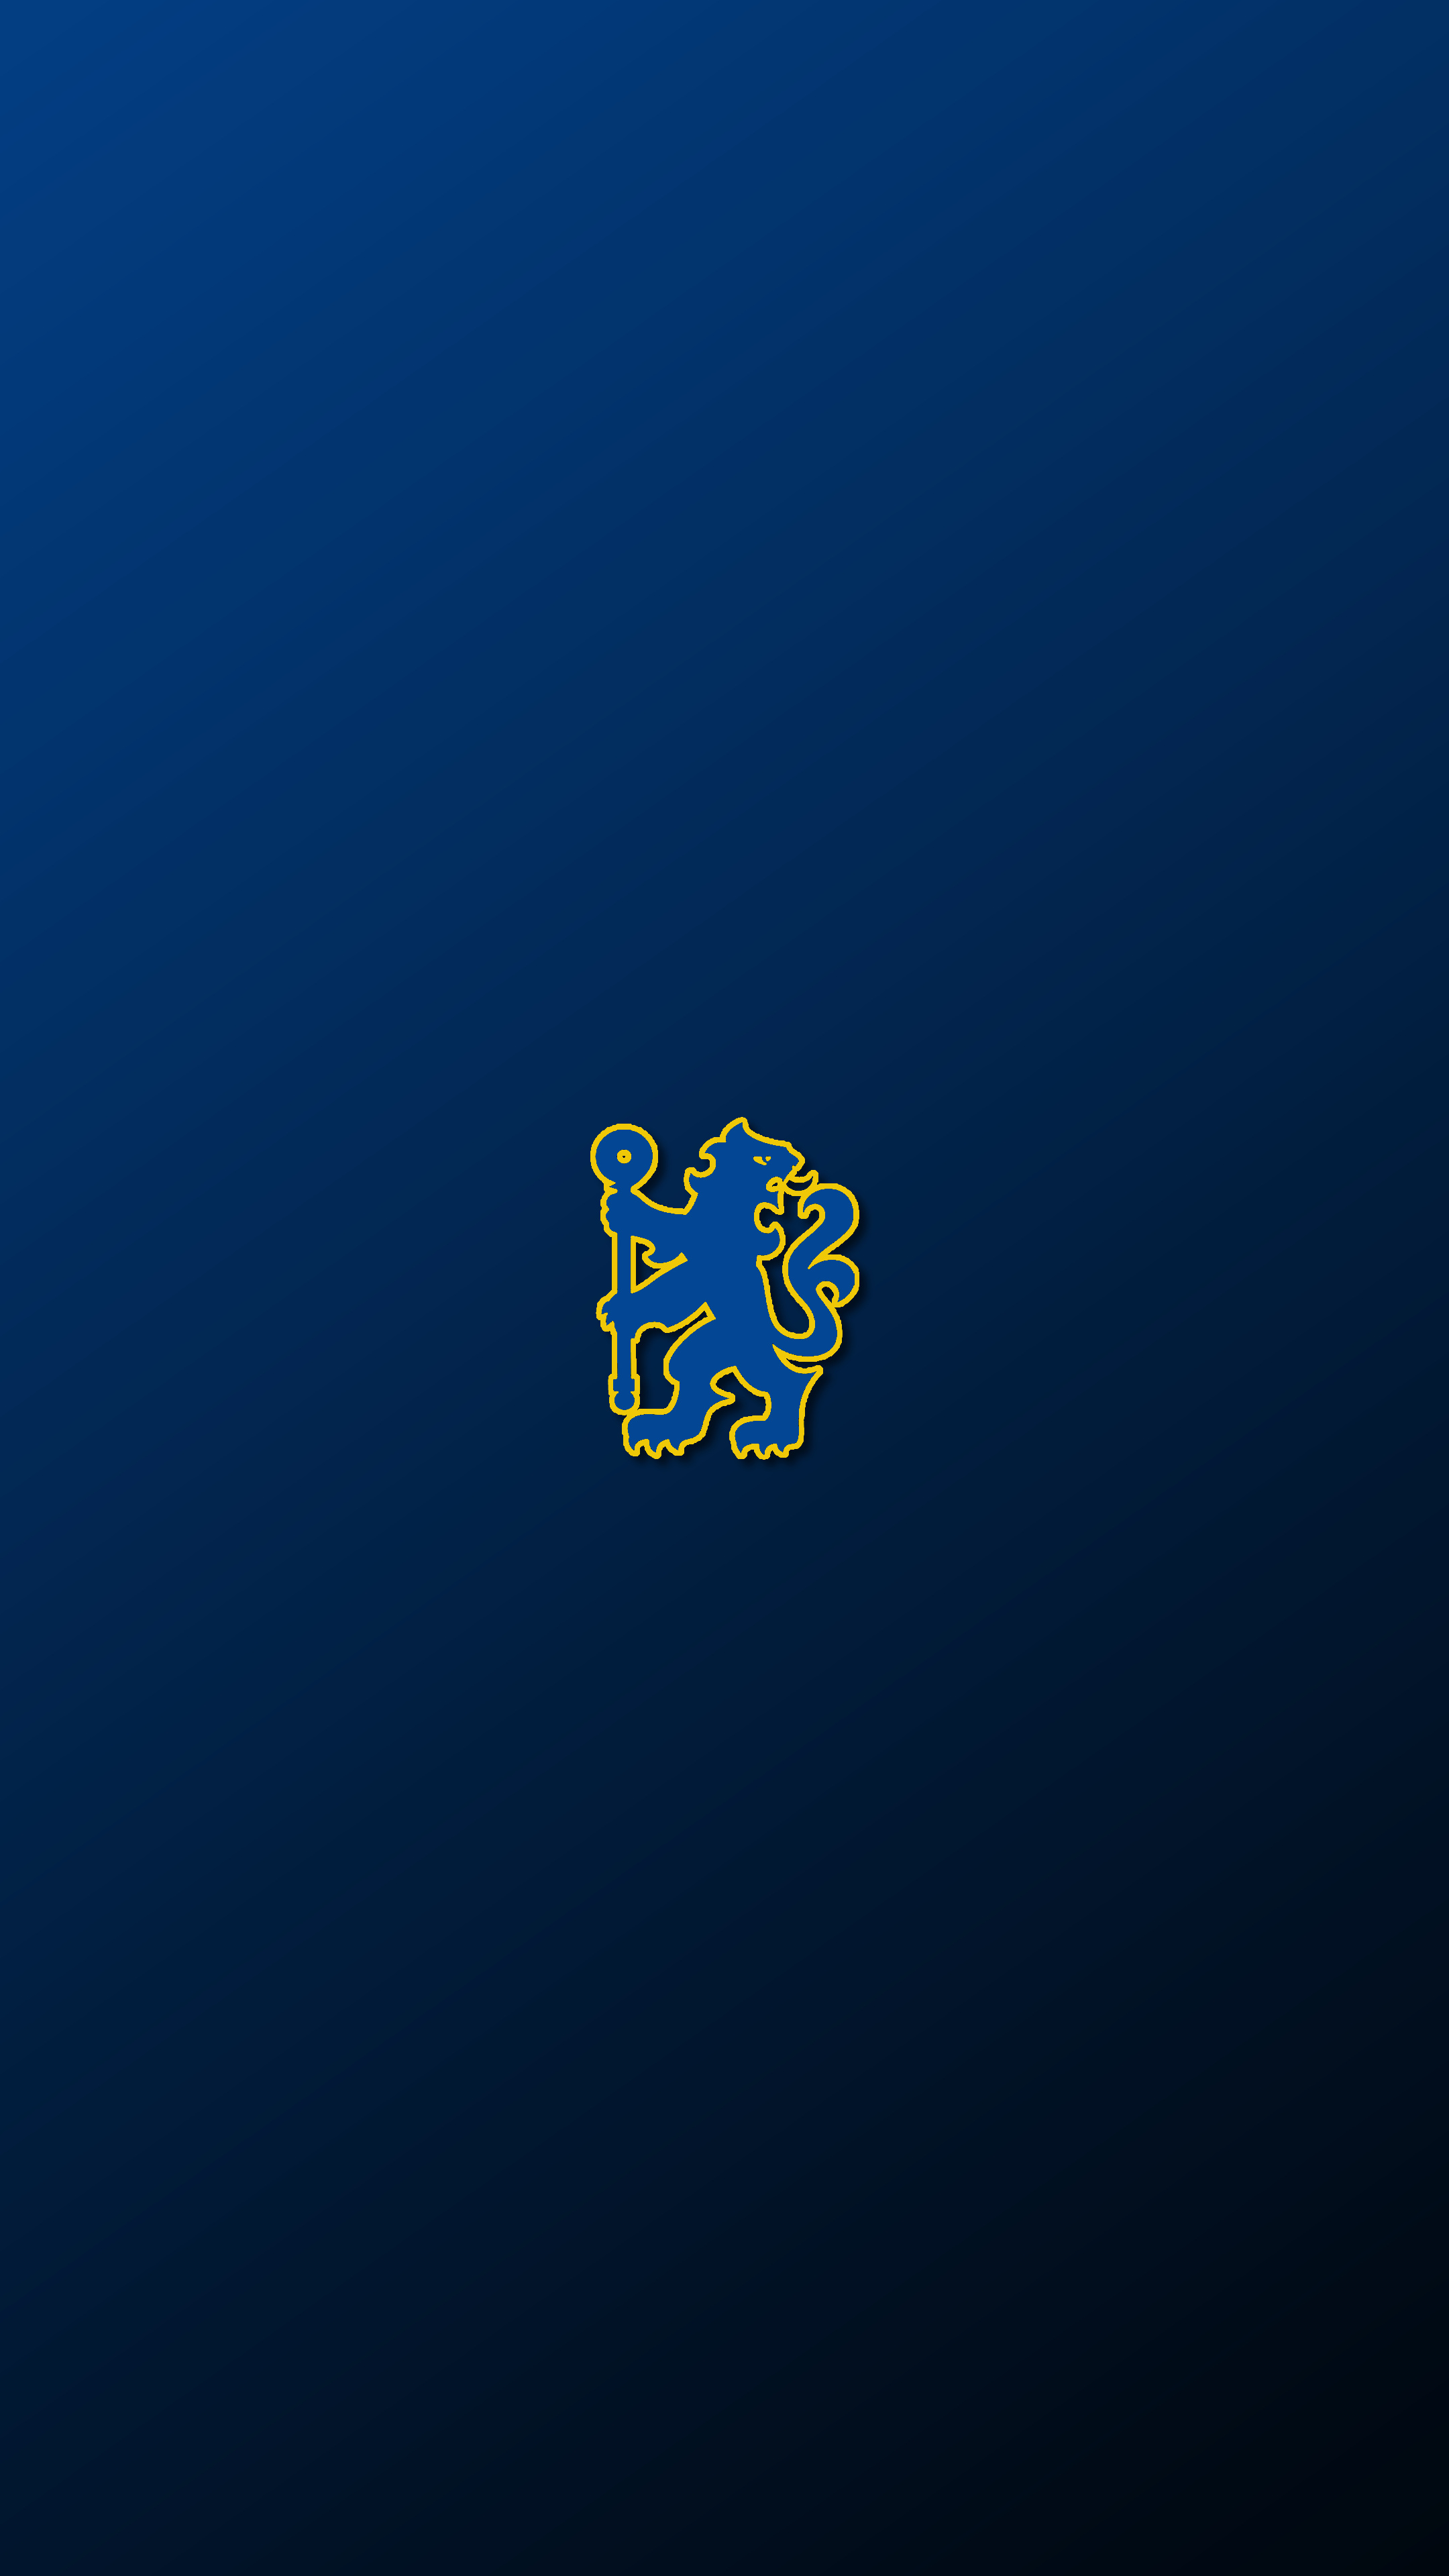 Chelsea: One of five clubs to have won all three pre-1999 main European club competitions. 2160x3840 4K Wallpaper.